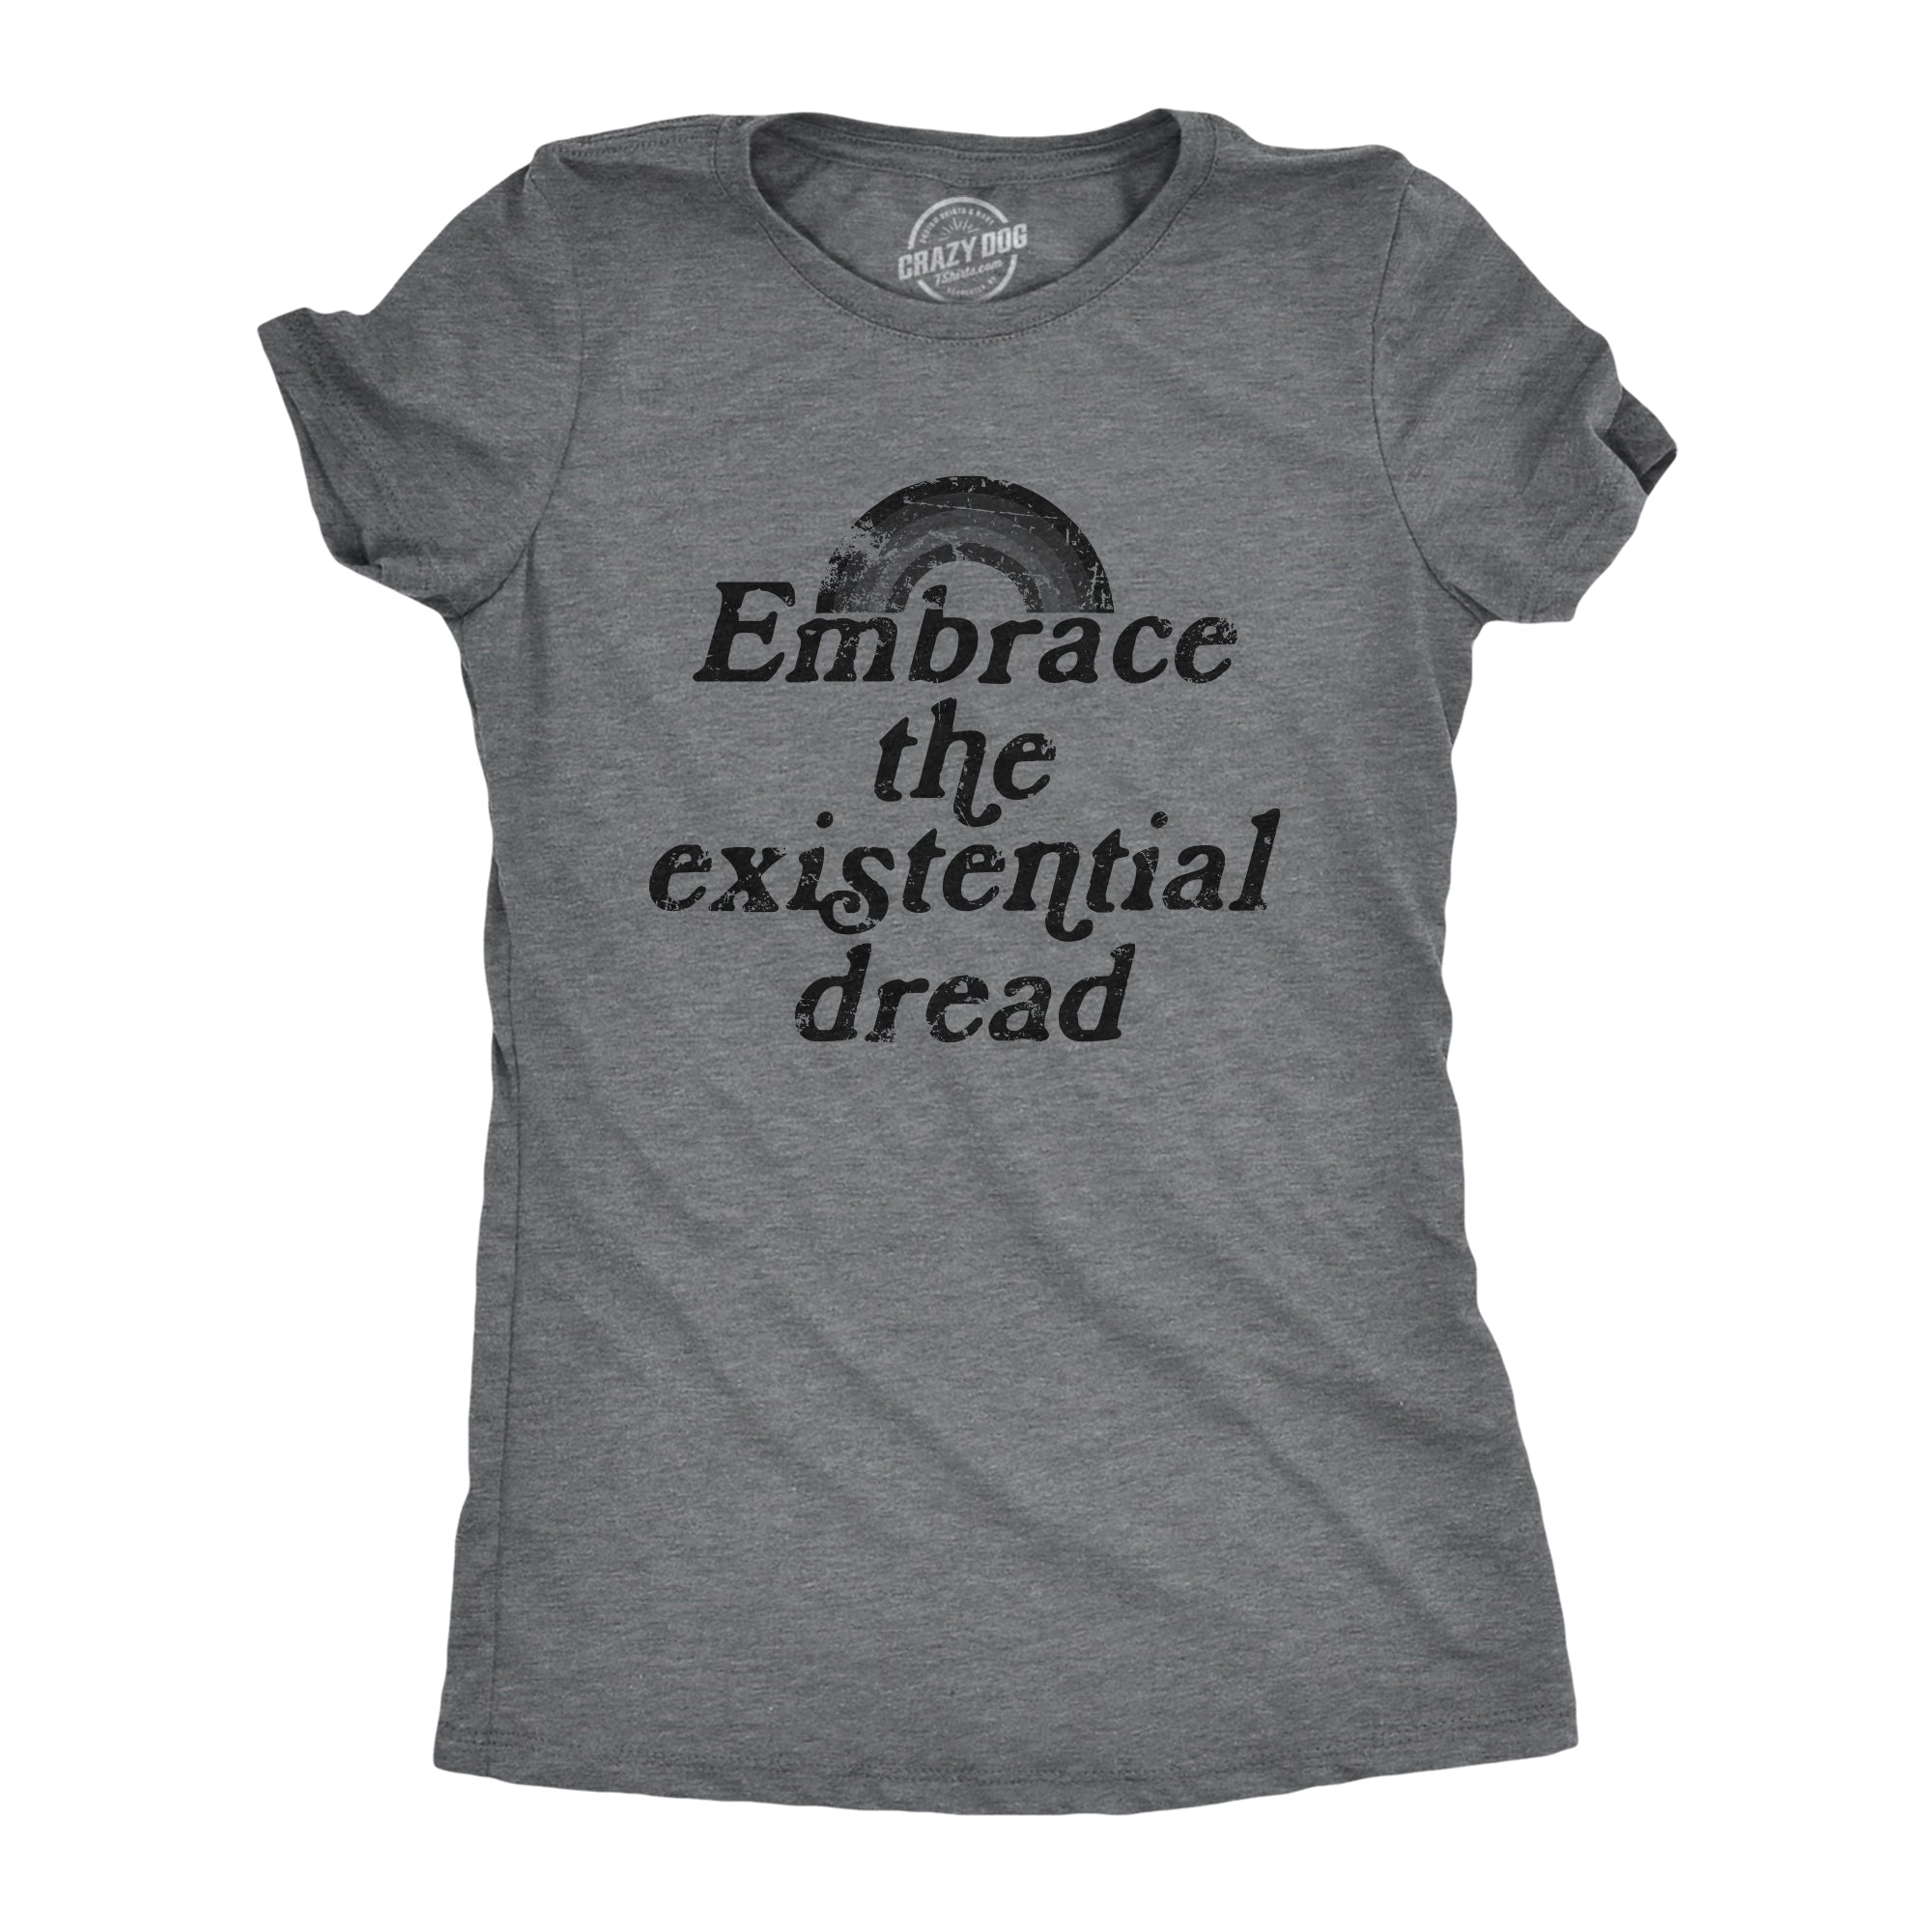 Funny Dark Heather Grey - DREAD Embrace The Existential Dread Womens T Shirt Nerdy Sarcastic Tee